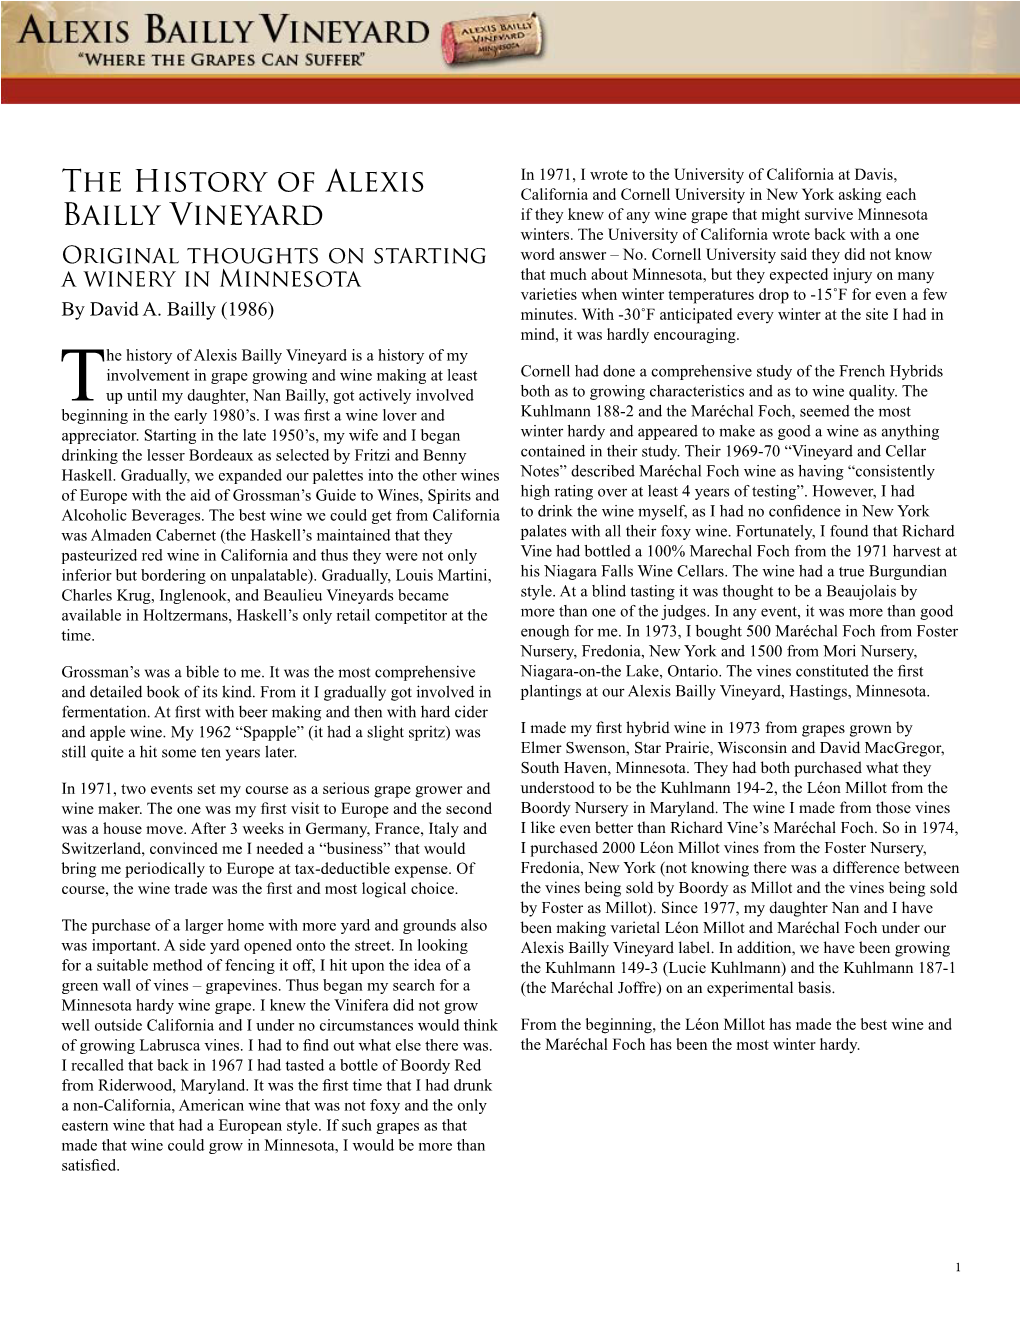 The History of Alexis Bailly Vineyard